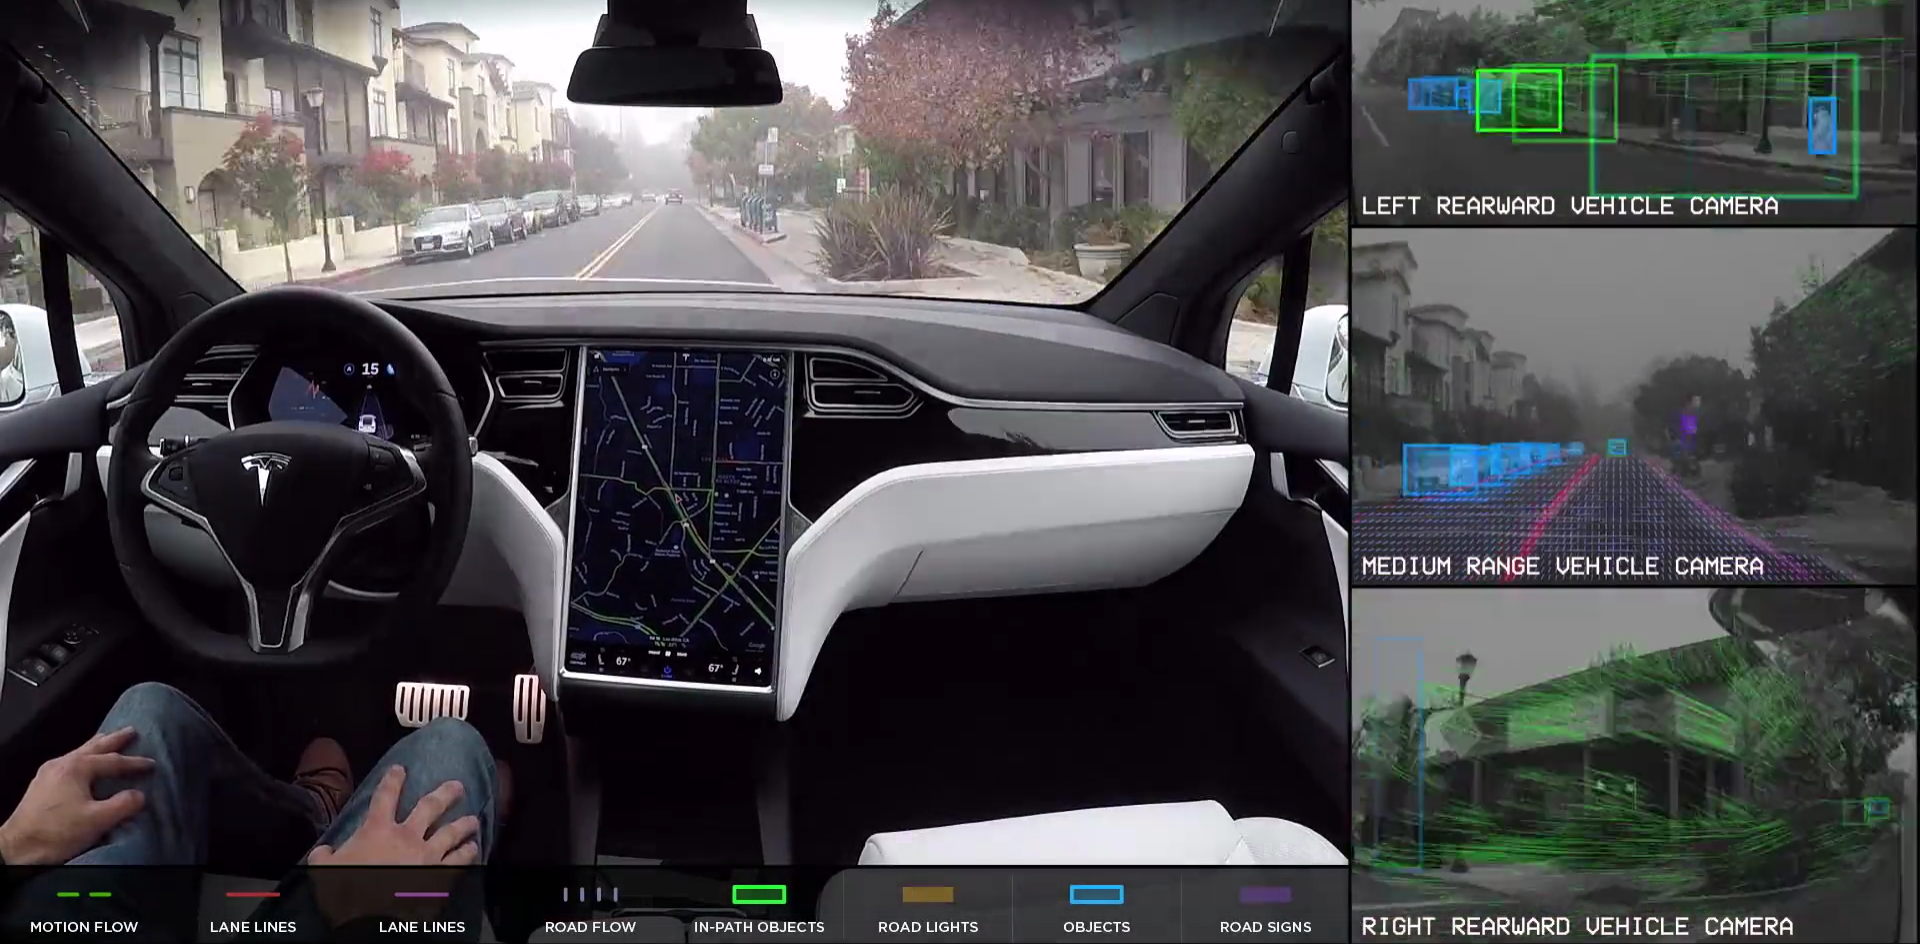 Tesla releases new selfdriving demonstration video with realtime